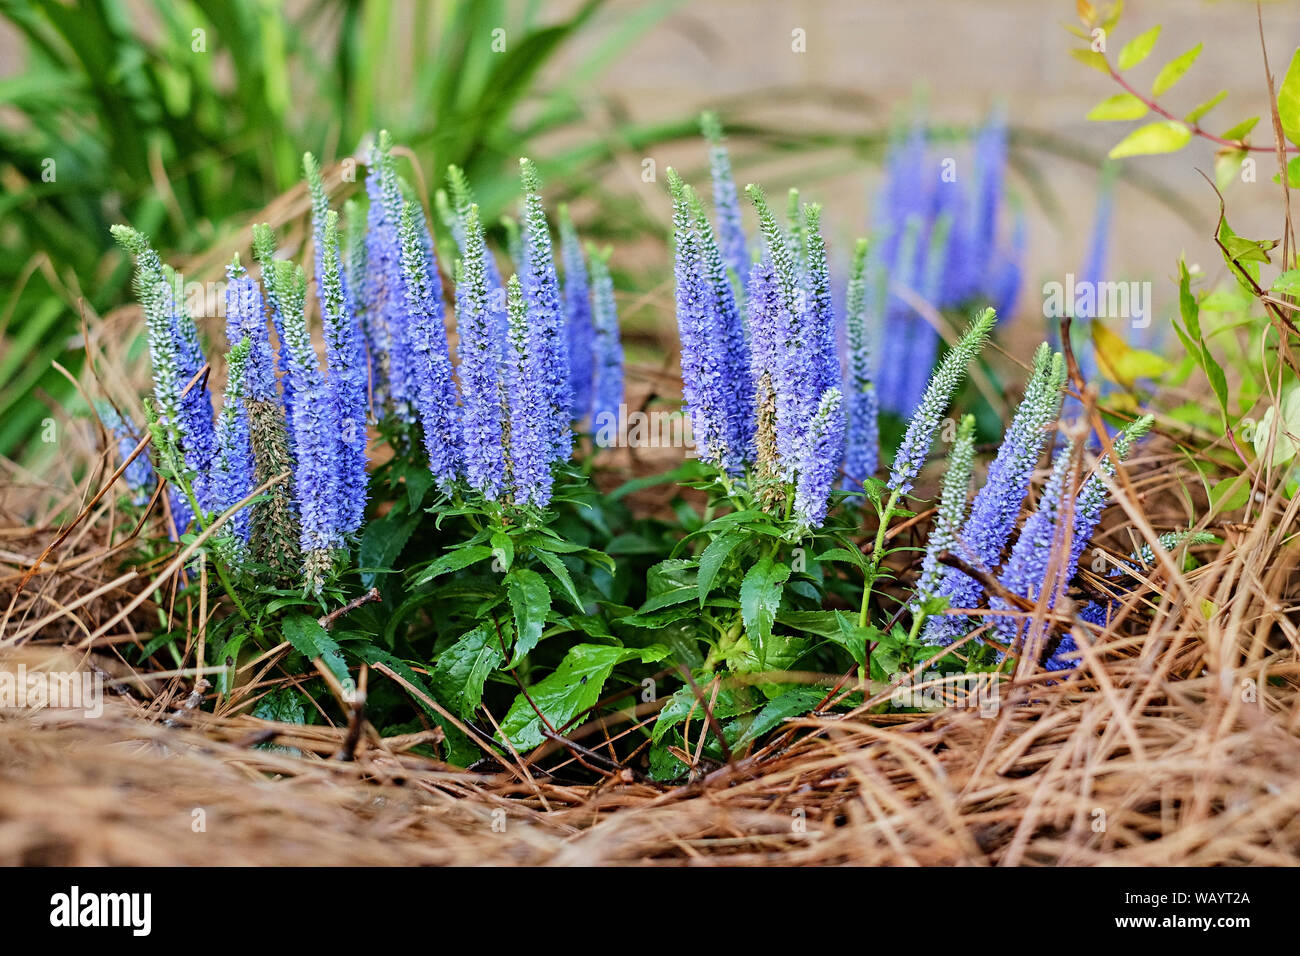 Sixteen candles, 16 candles, or, Clethra alnifolia (clethraceae),  shown with blue or purple flowers, blooms or blossoms in a home garden. Stock Photo